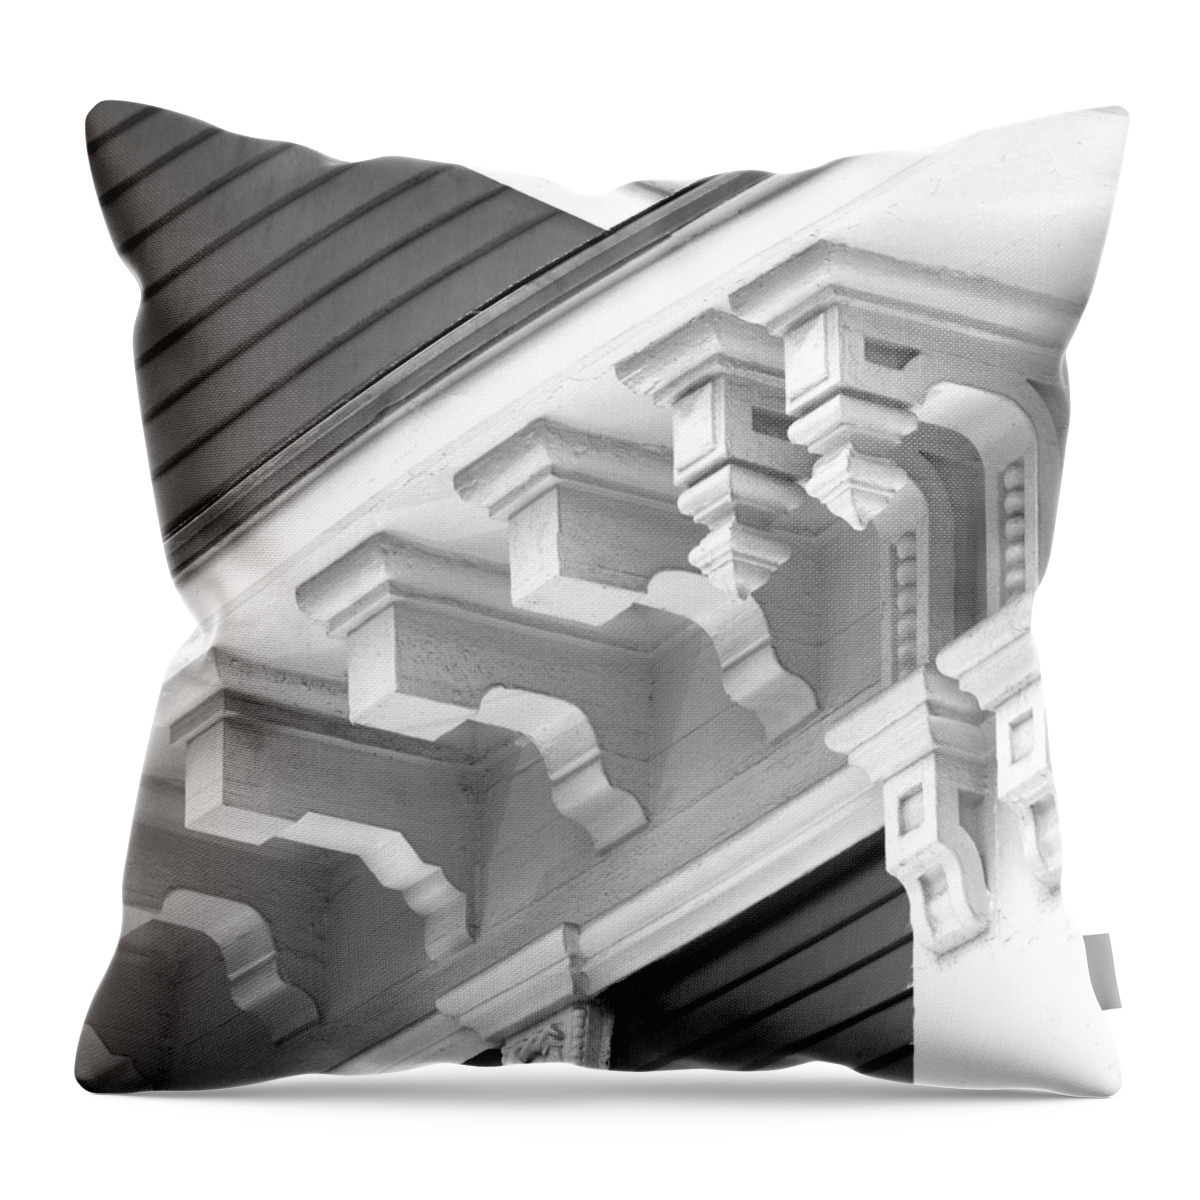 Nantucket Throw Pillow featuring the photograph Nantucket Architecture 1 by Charles Harden